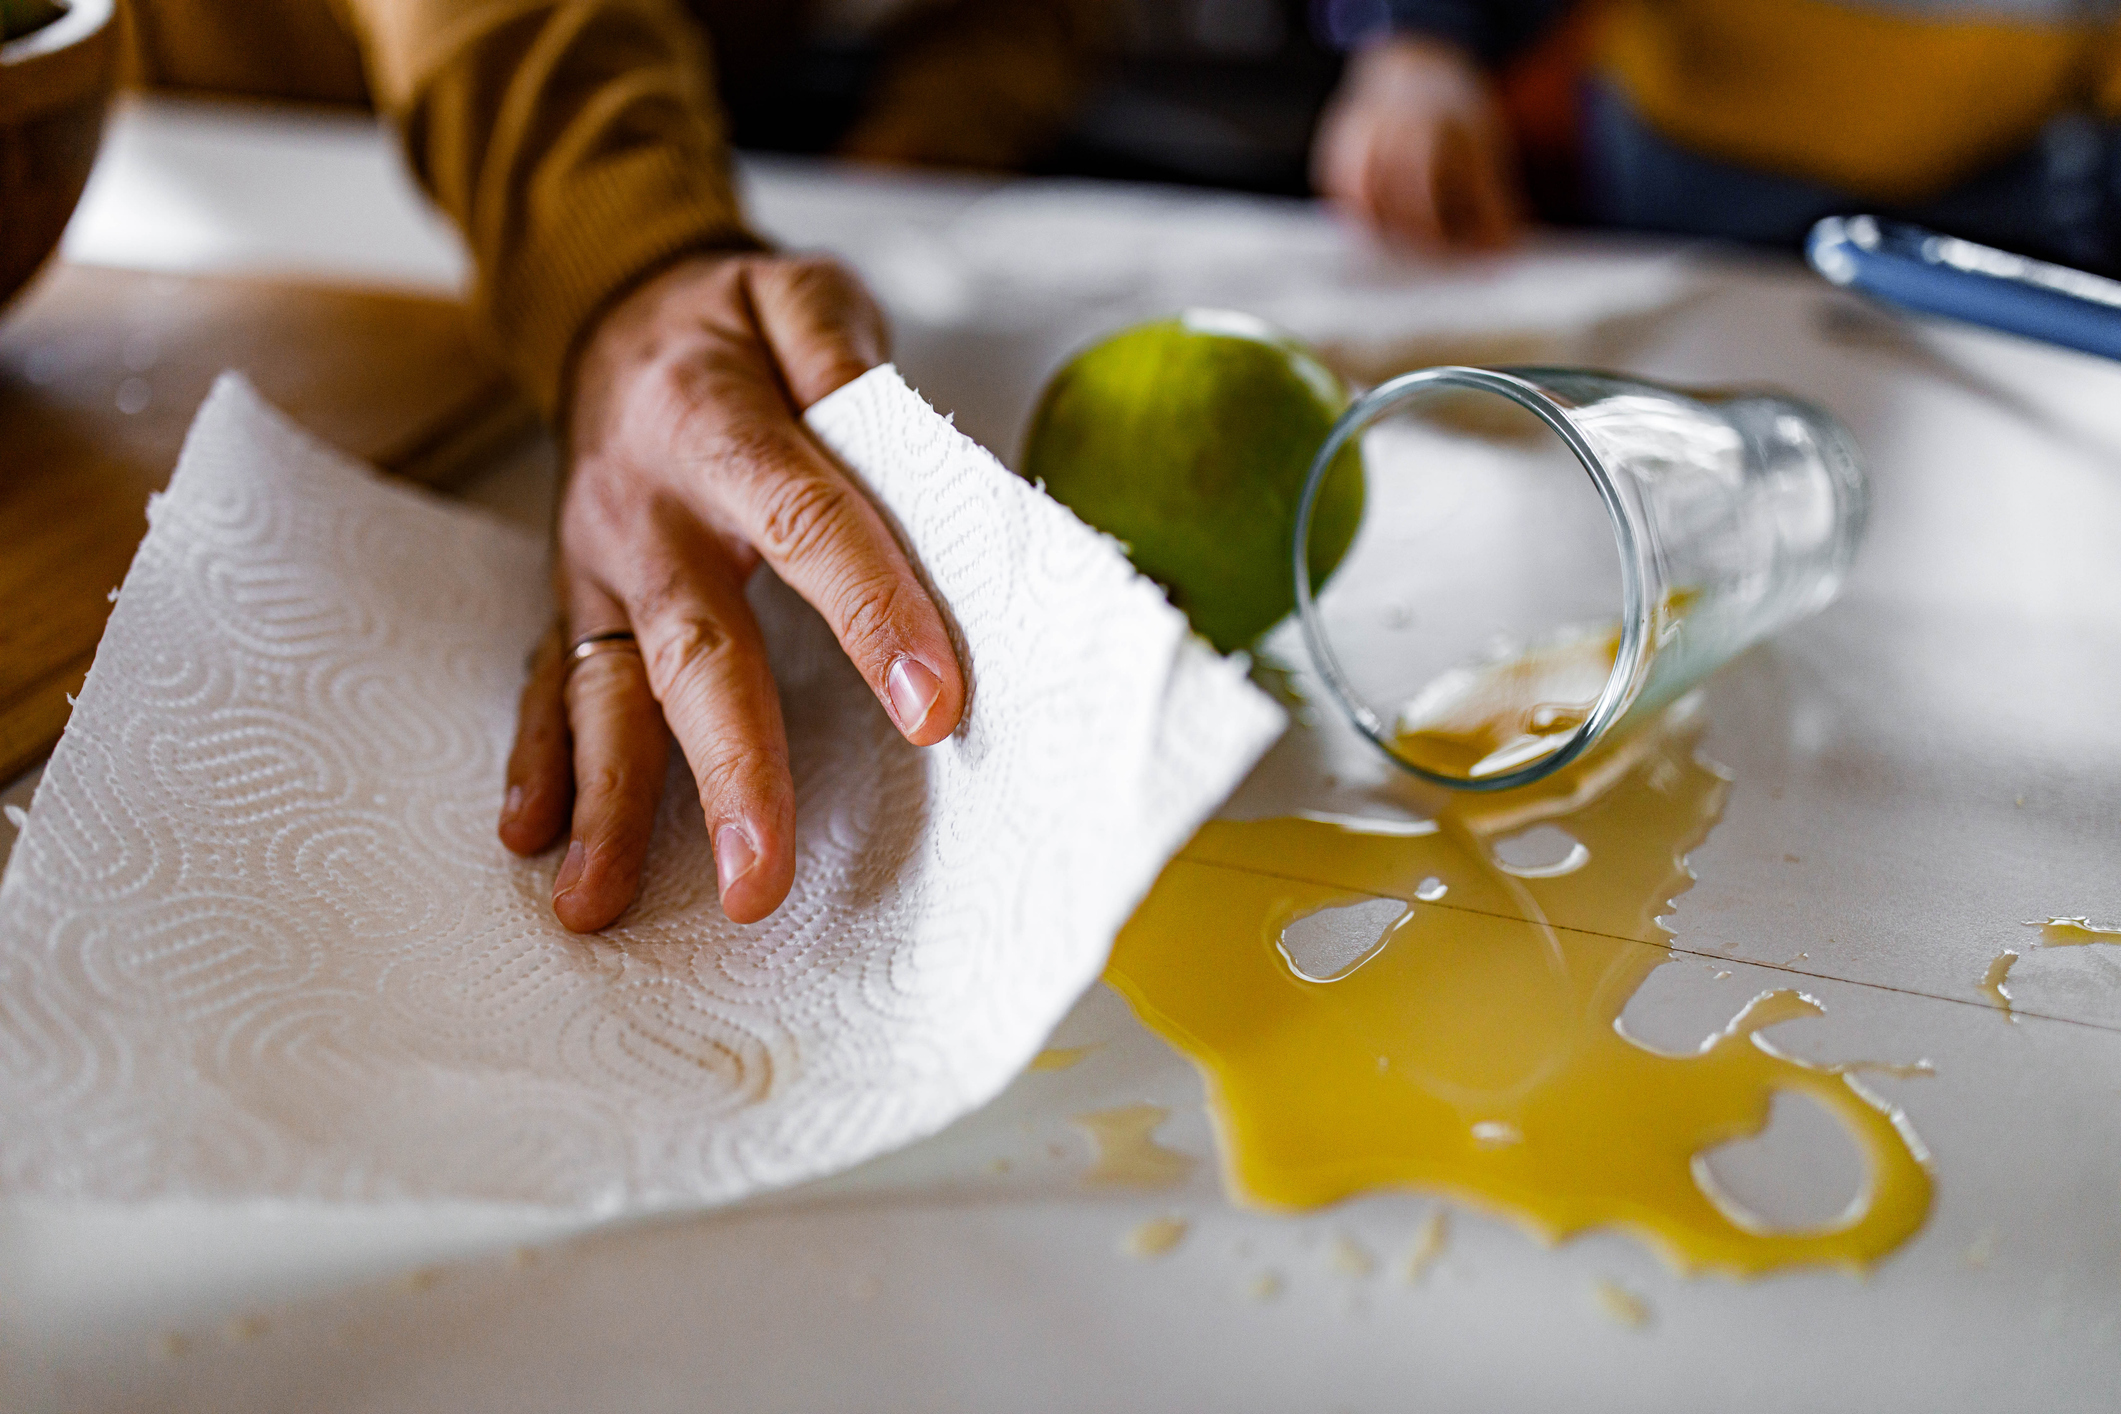 Closeup of a brown-skinned hand as someone uses paper towels to clean up a glass of orange juice spilled on a white table.